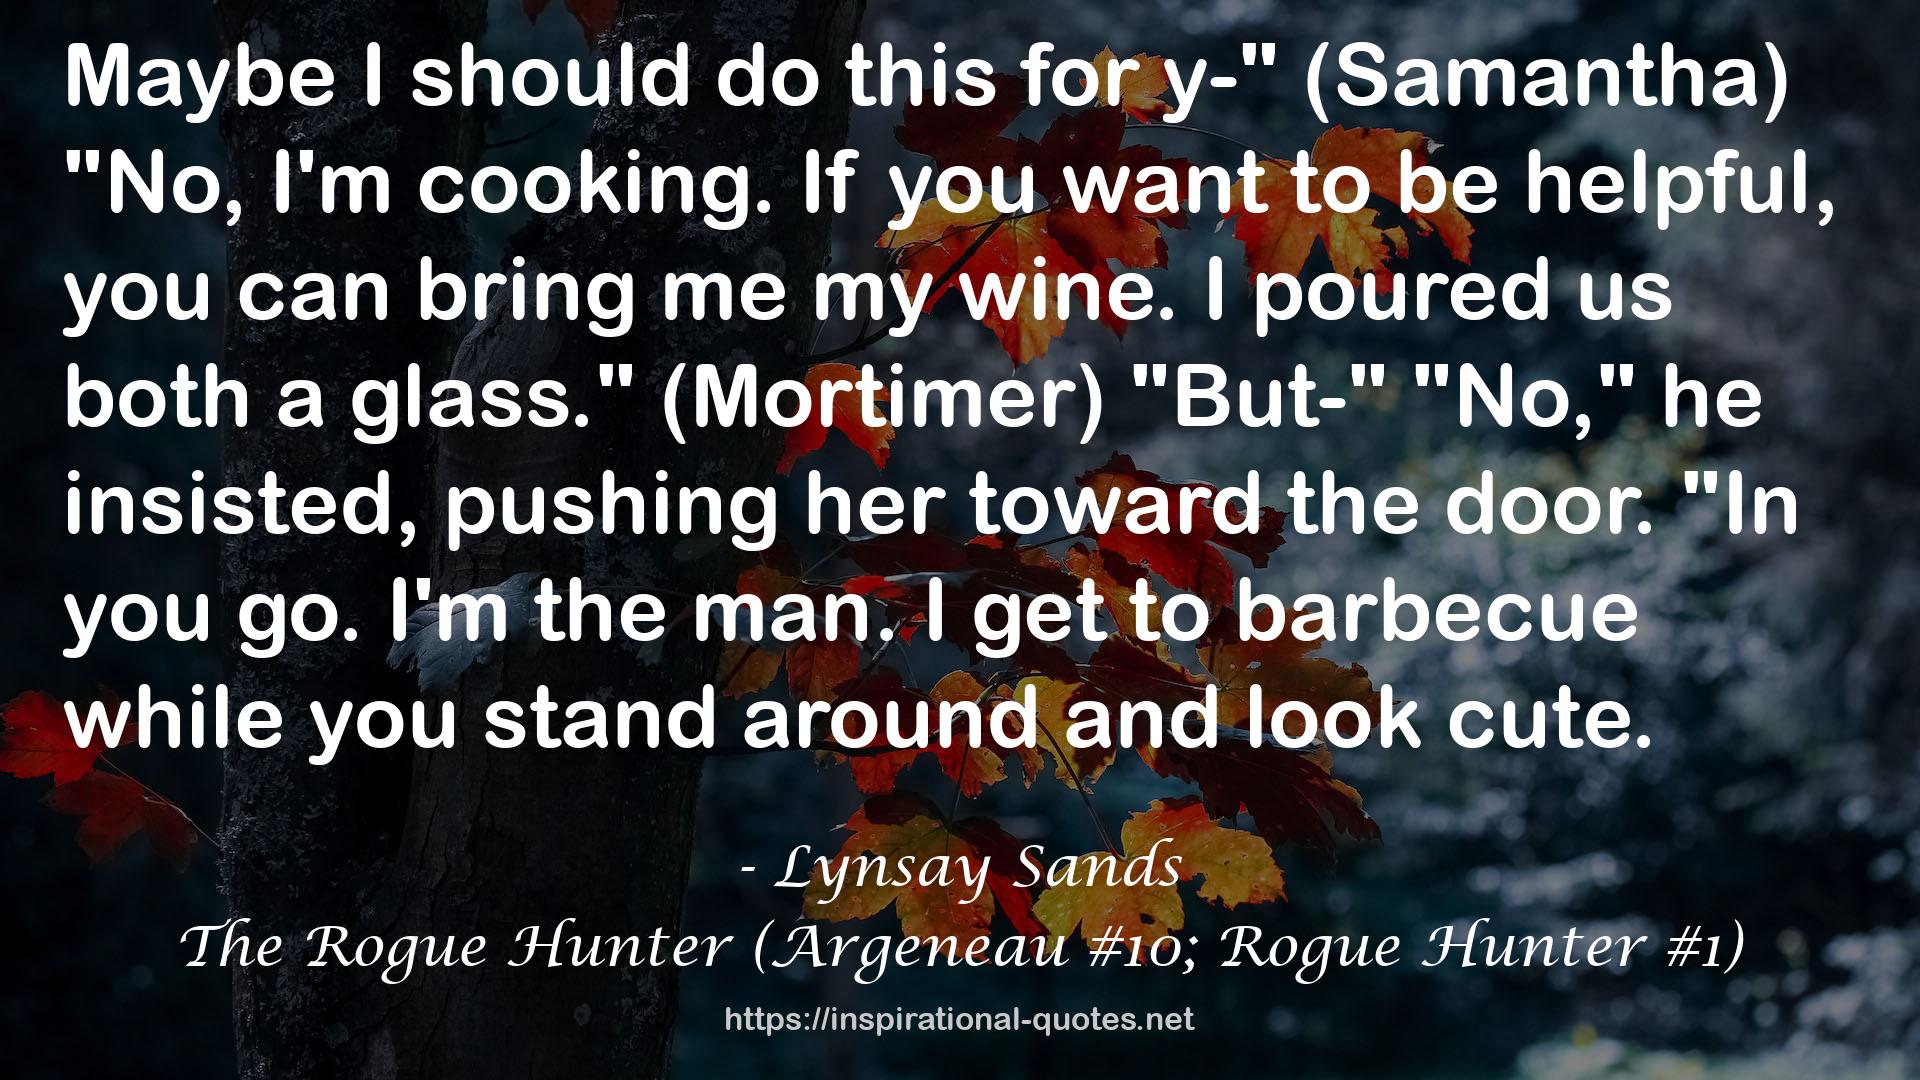 The Rogue Hunter (Argeneau #10; Rogue Hunter #1) QUOTES